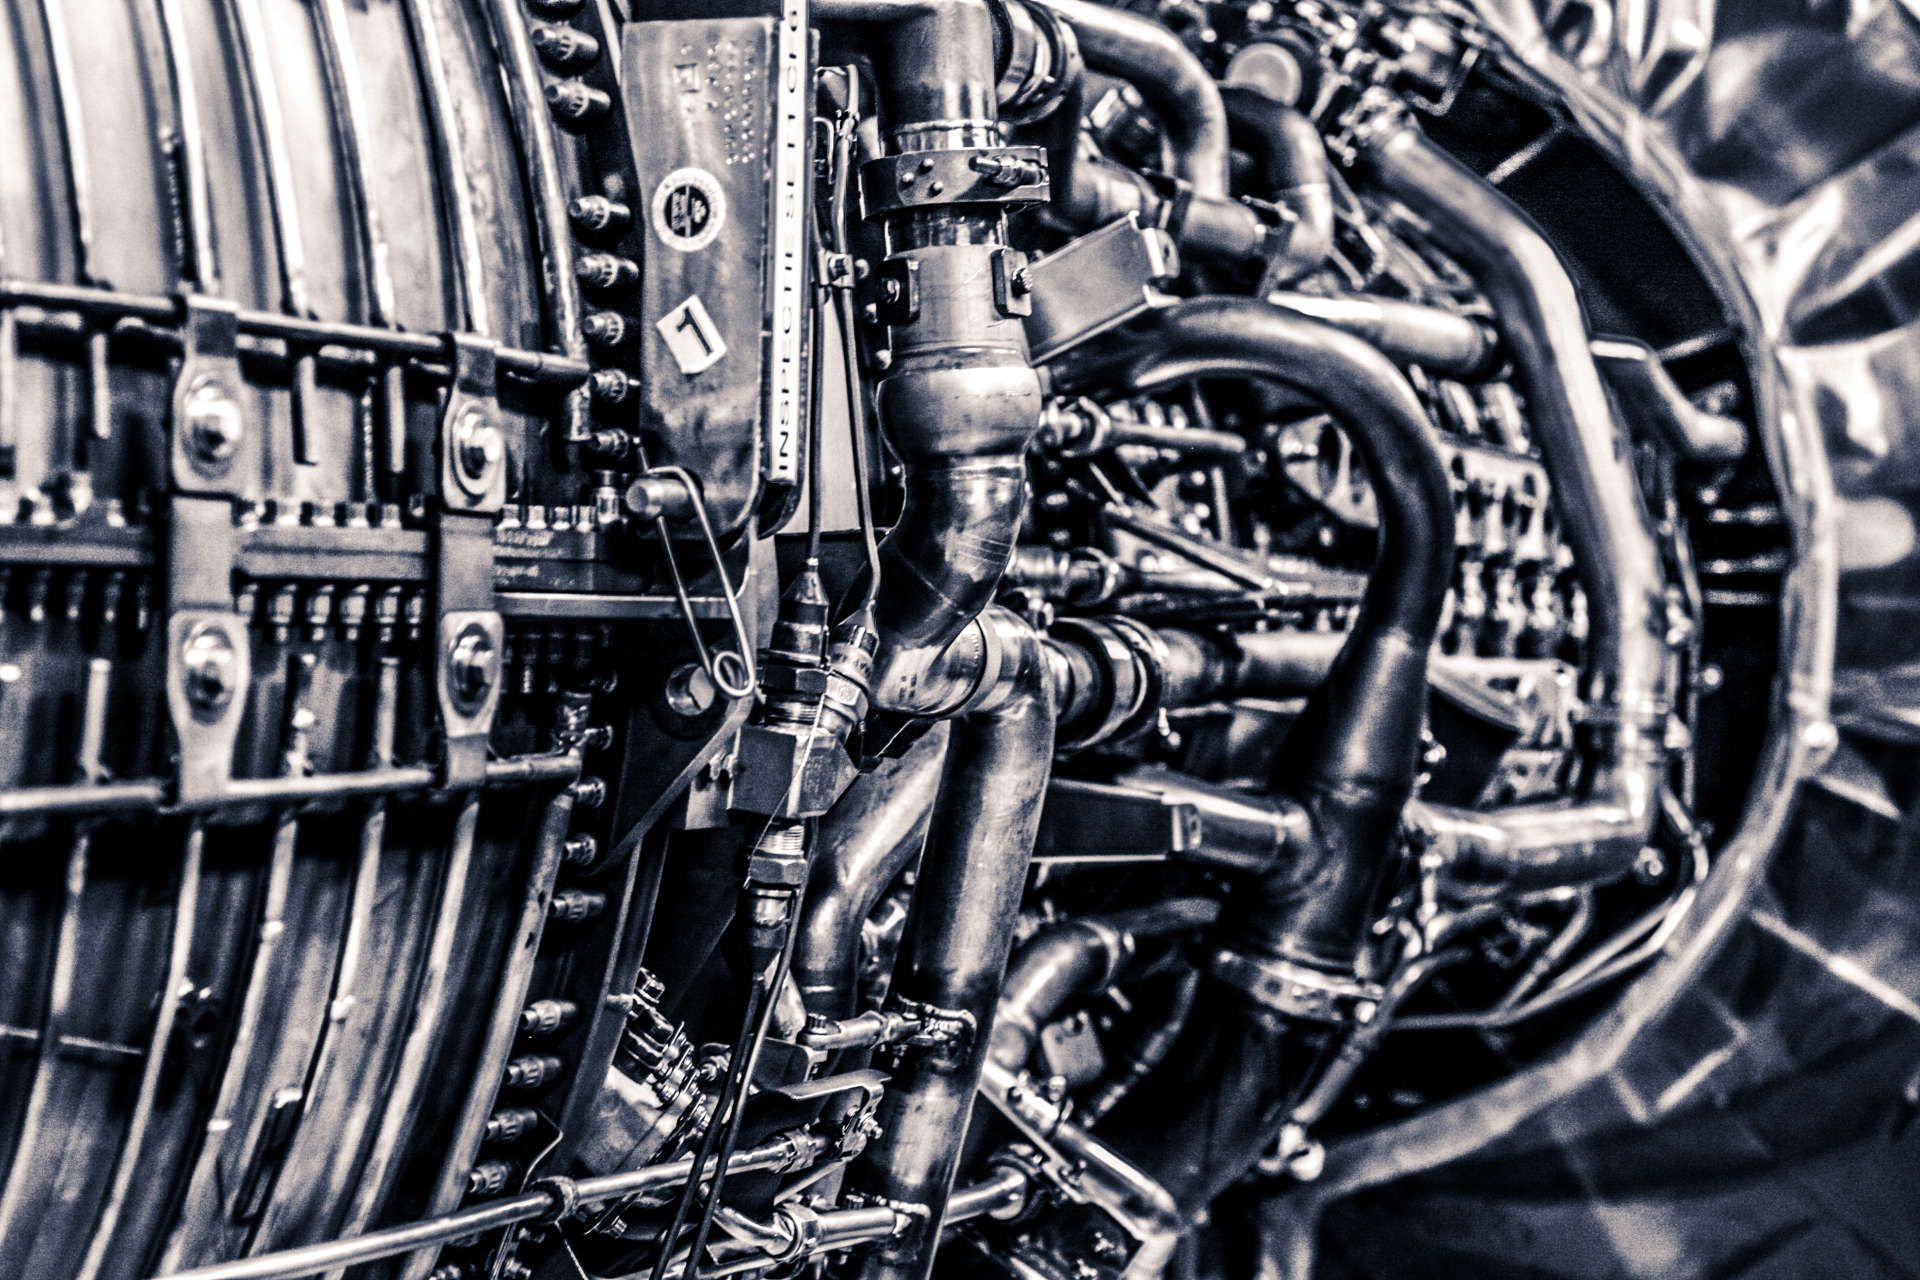 Things You Probably Don't Know About Jet Engines